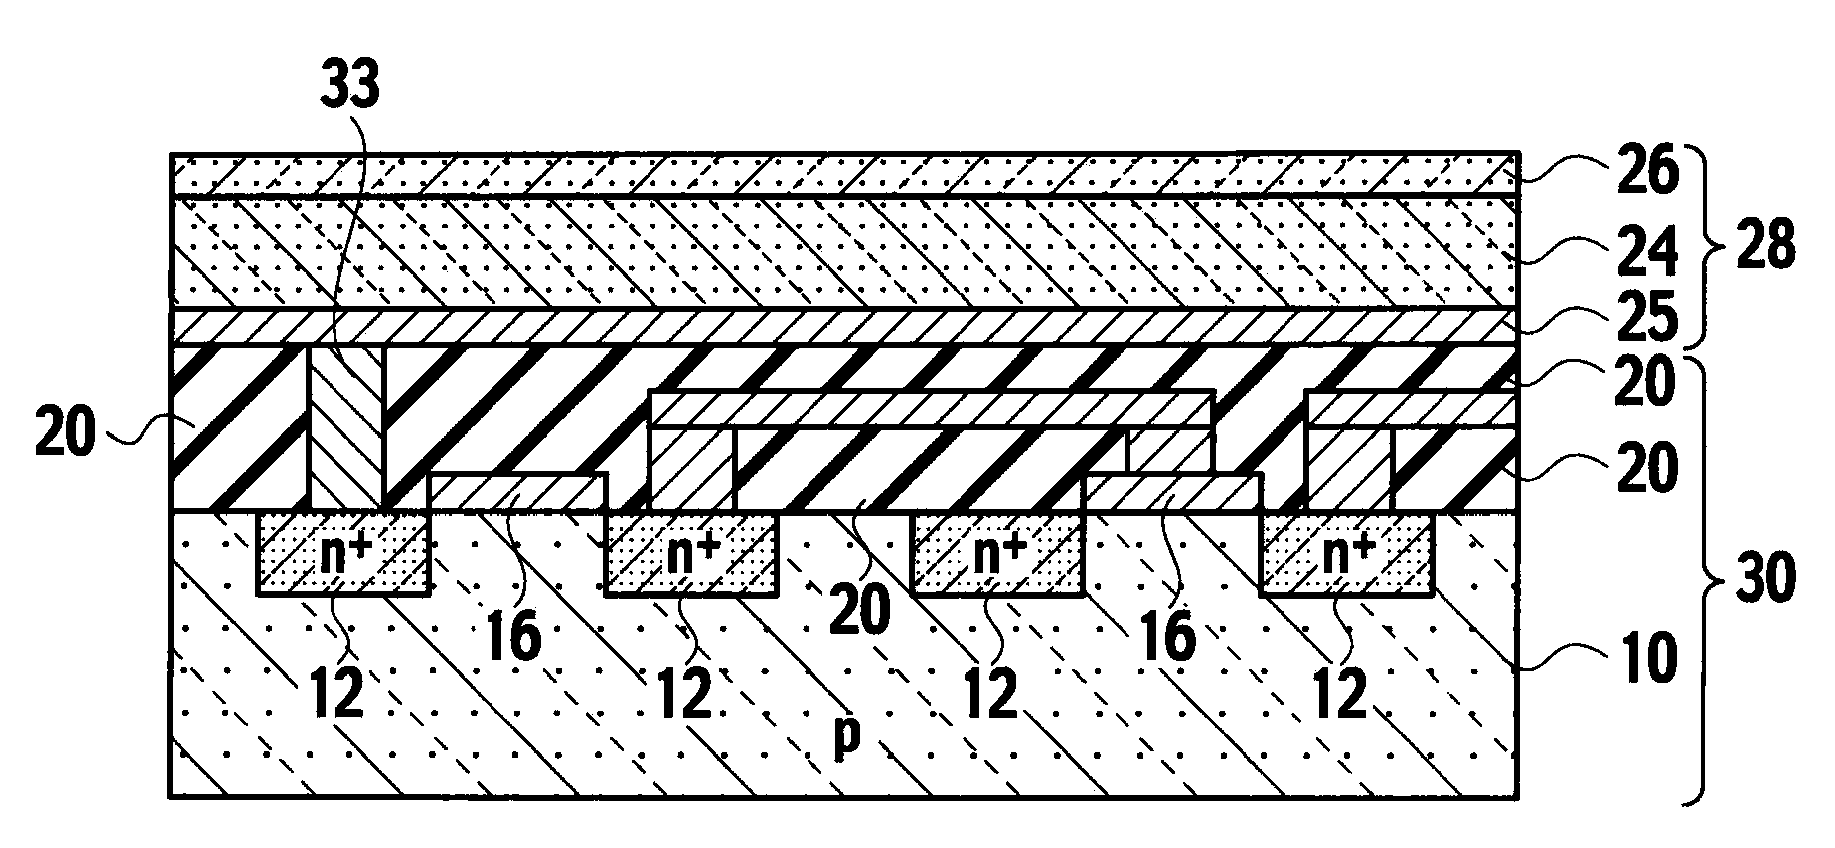 Solid state imaging device and fabrication method for the same